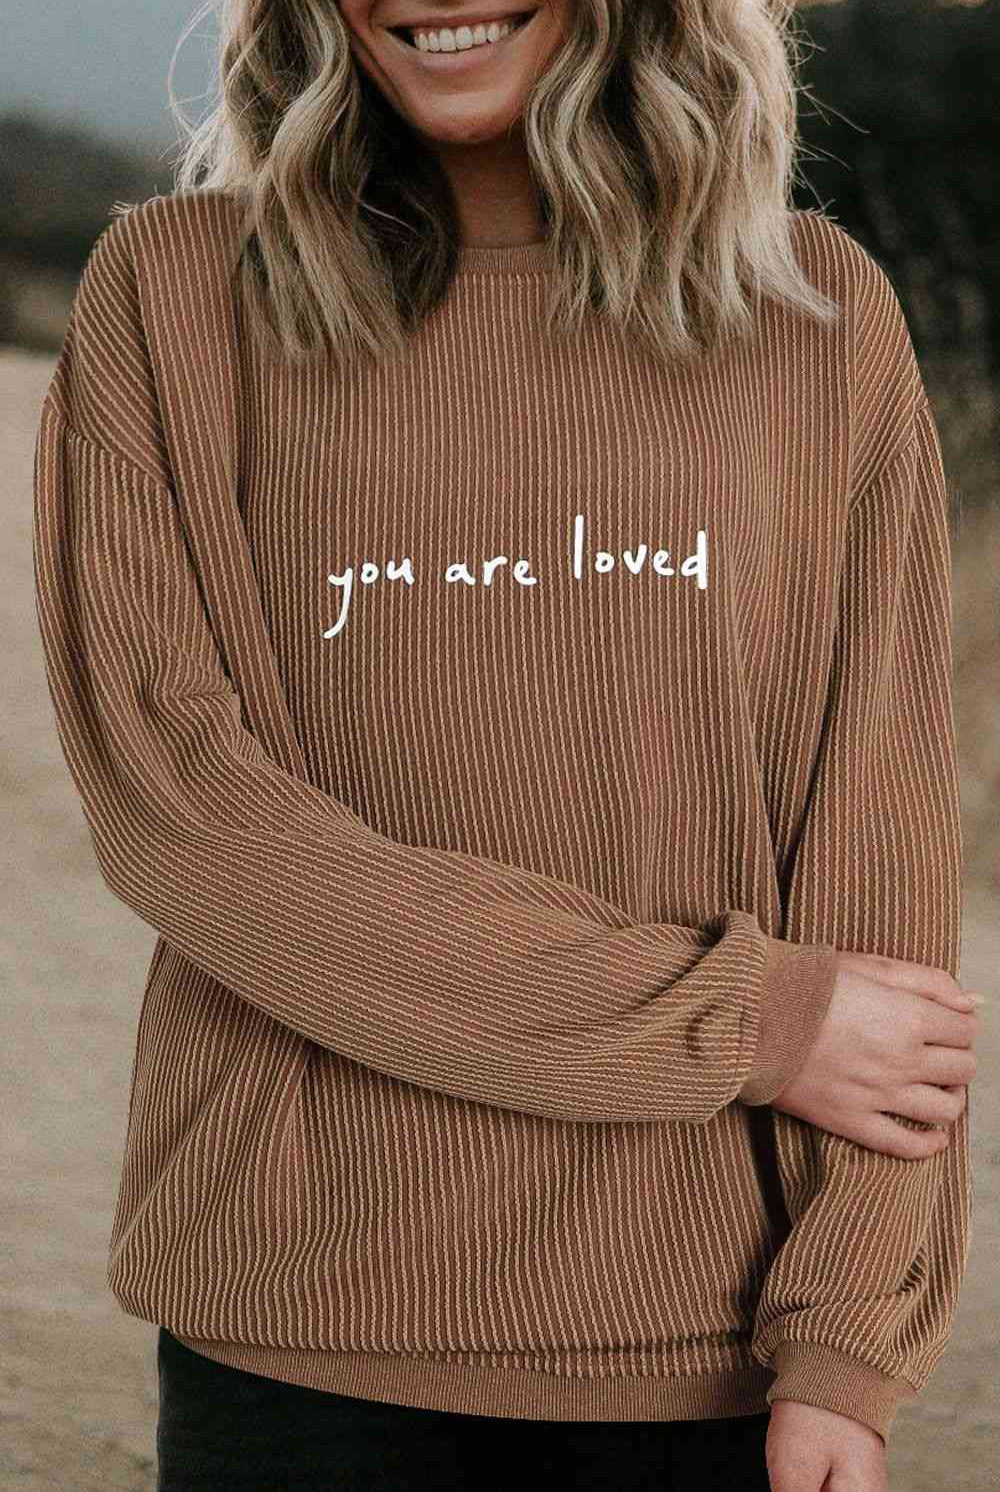 YOU ARE LOVED Graphic Dropped Shoulder Sweatshirt - GemThreads Boutique